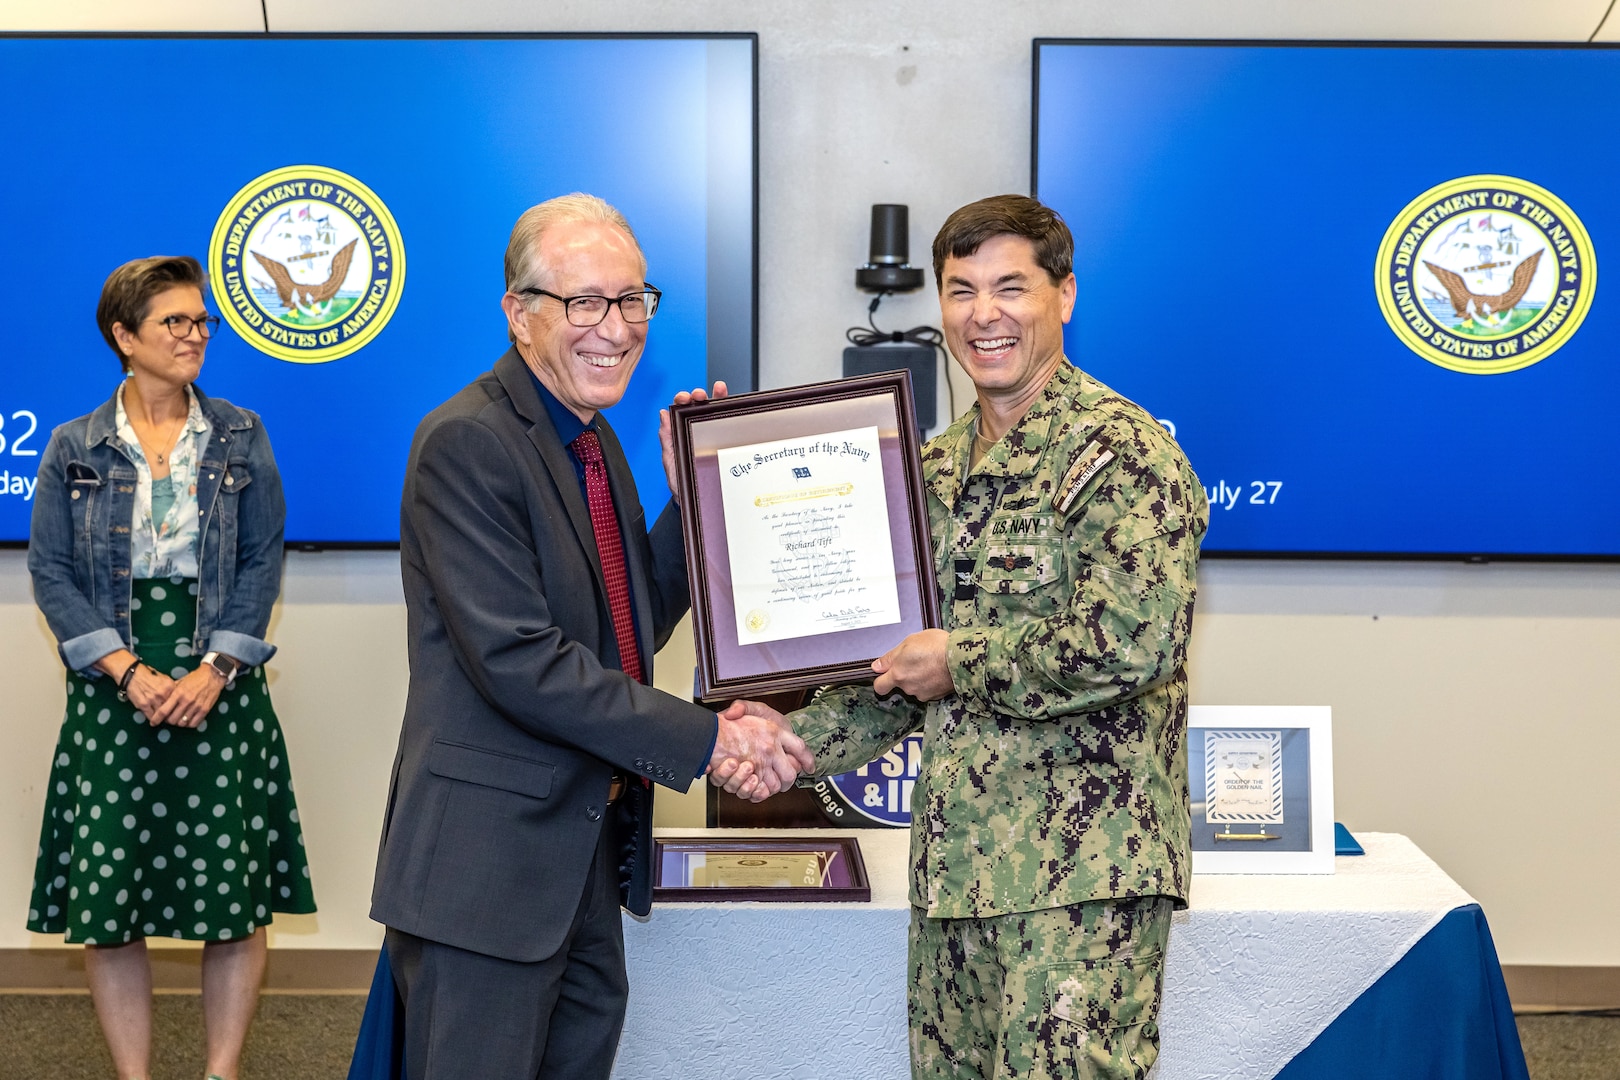 Capt. JD Crinklaw, commander, Puget Sound Naval Shipyard & Intermediate Maintenance Facility, presents Richard Tift, outgoing executive director of PSNS & IMF, with his official Certificate of Retirement July 27, 2023.